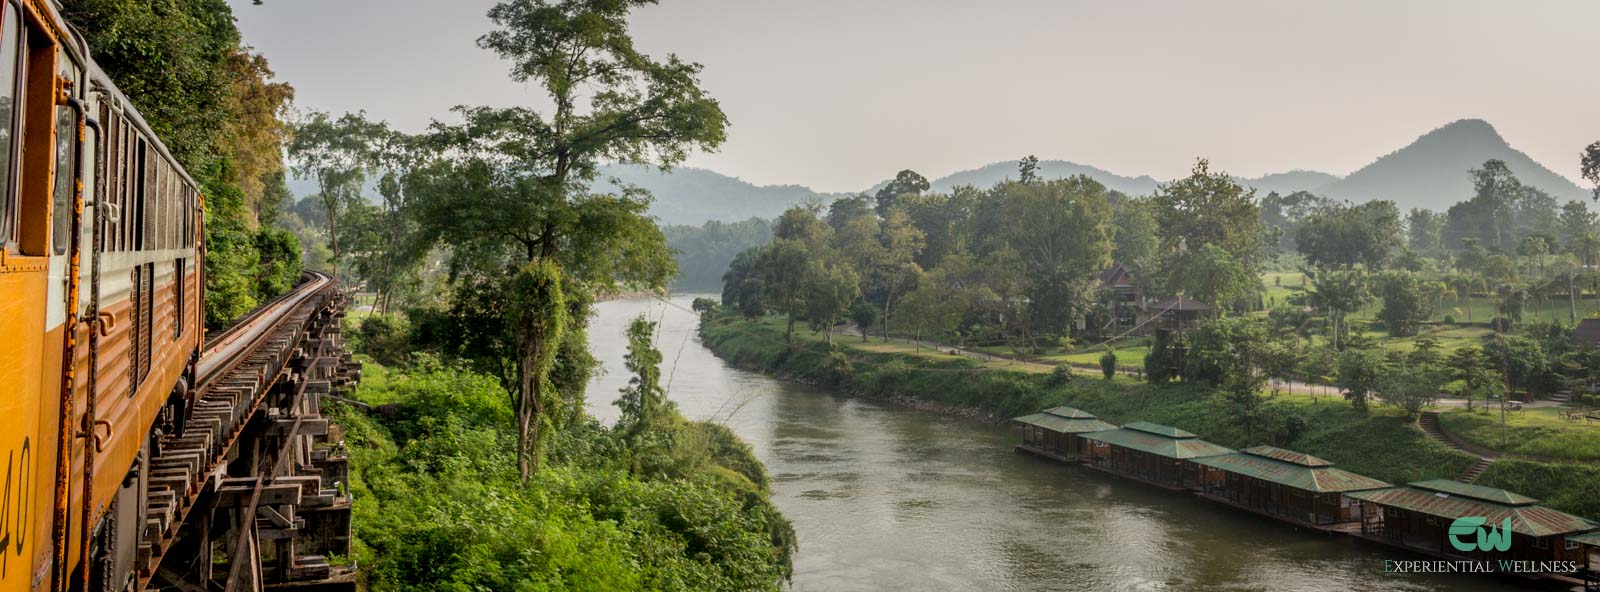 A train travels along the River Kwai